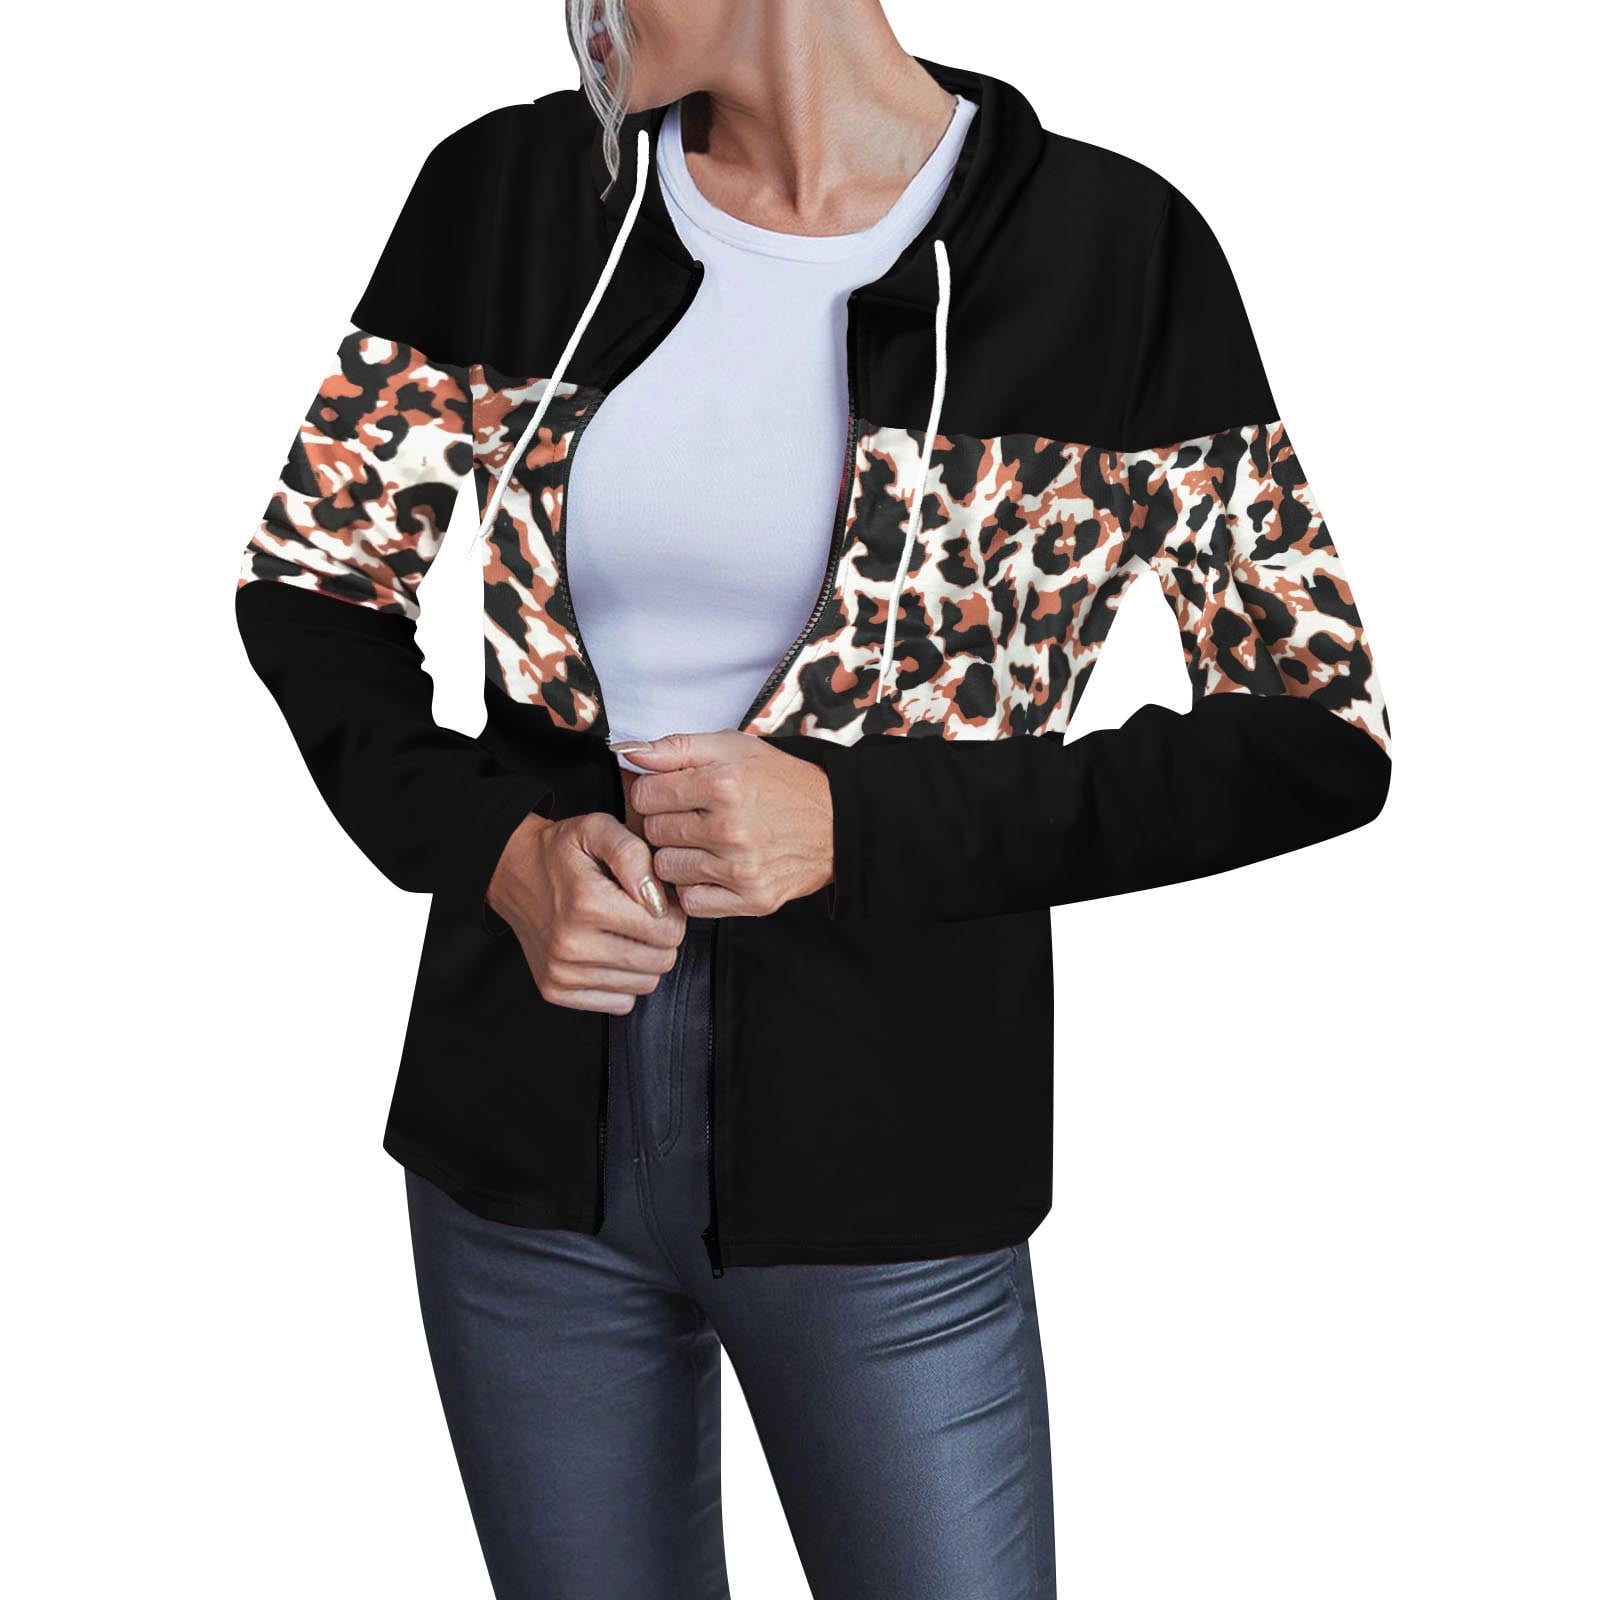 JDEFEG Bed Jackets Ladies Fashion Casual Colorblock Leopard Print Cropped Zip Jacket Lights Top Women Winter Coats for Women Polyester,Spandex Black M - Walmart.com